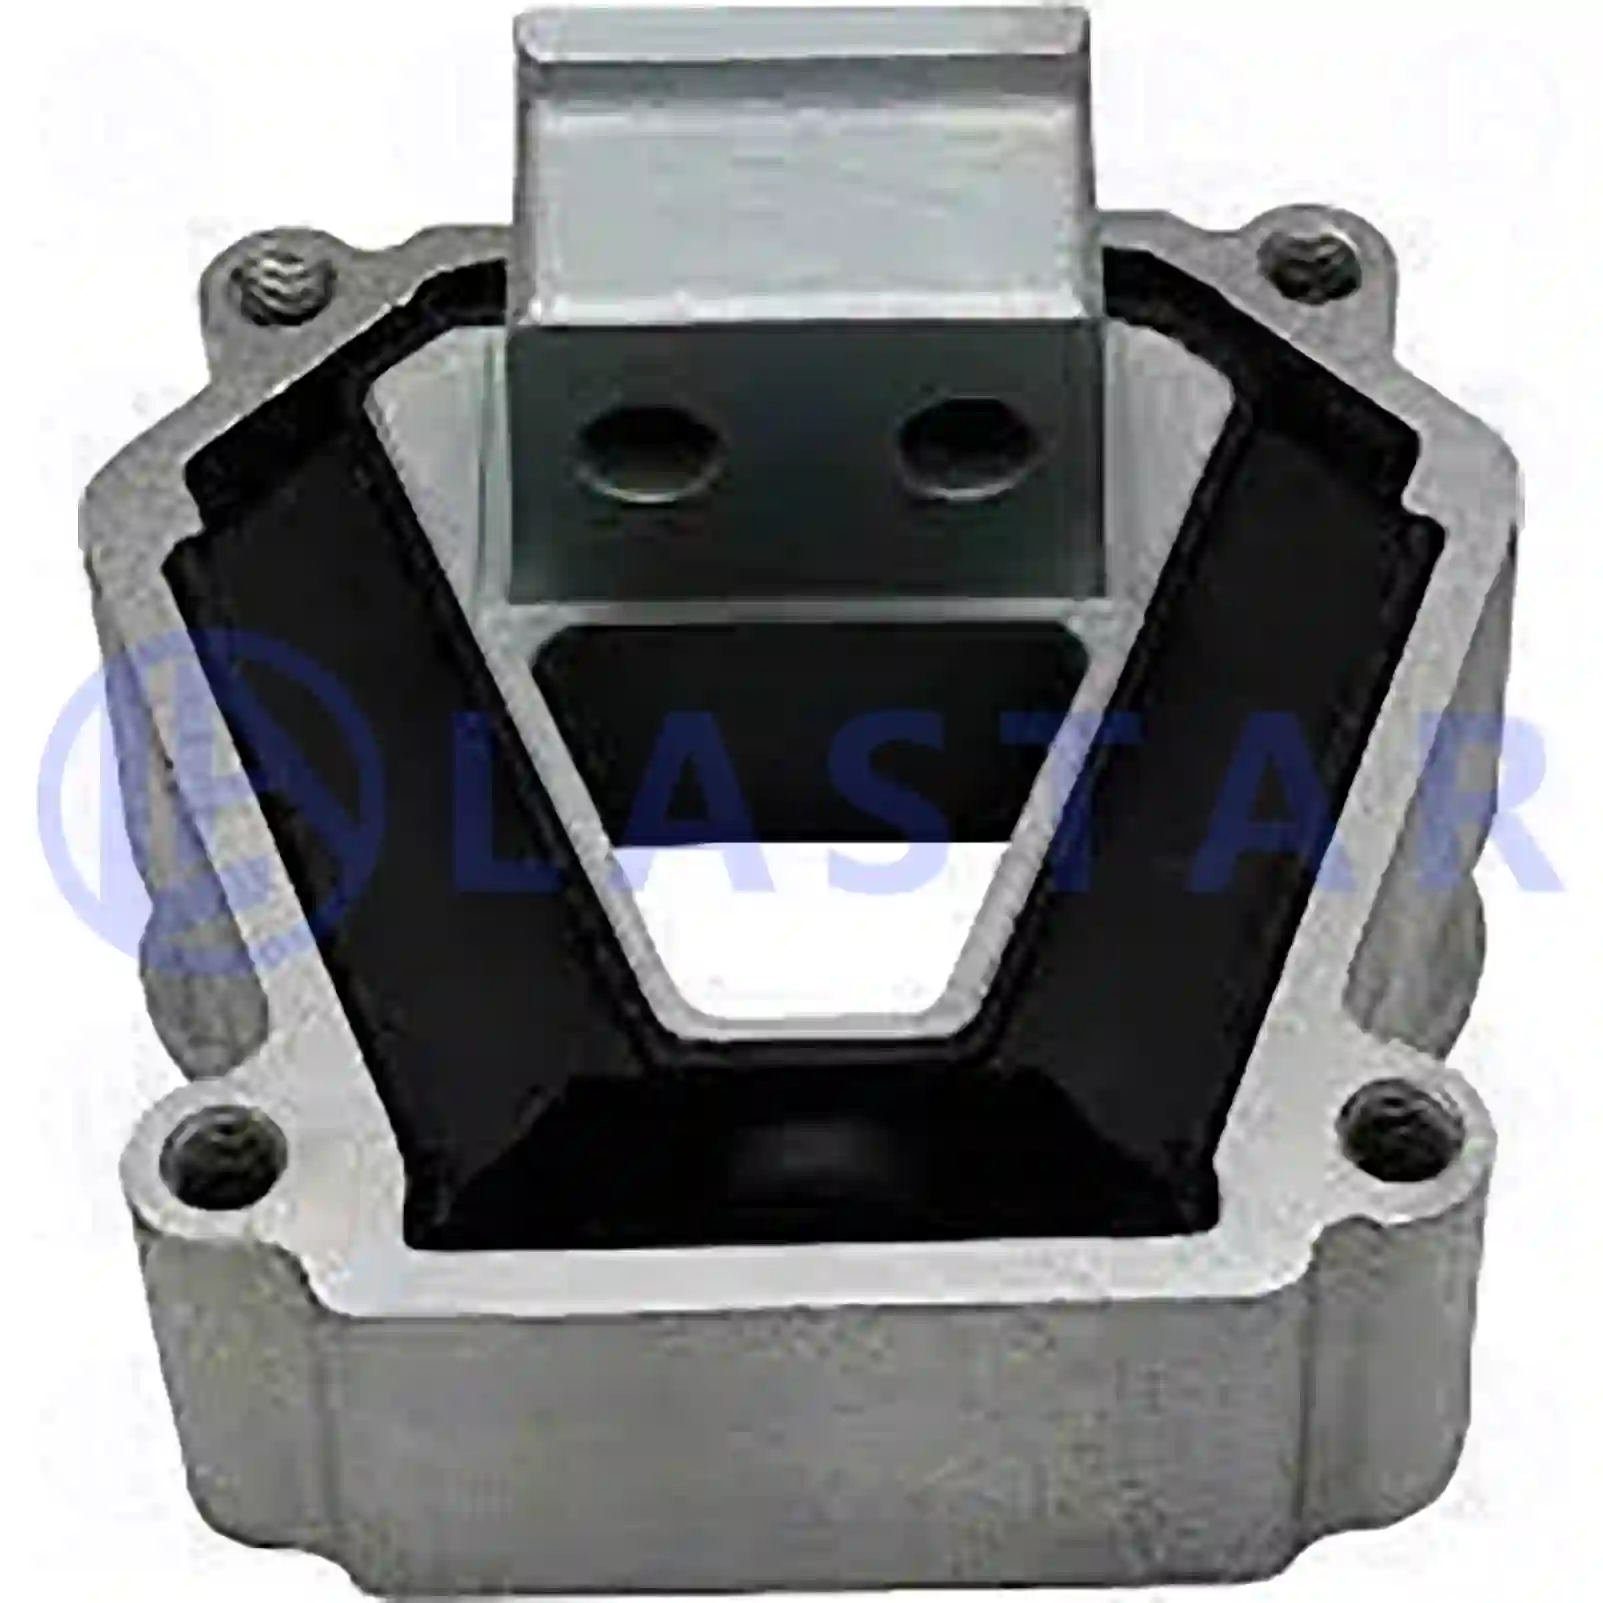 Engine mounting, 77700085, 08189379, 08189384, 8189379, 8189384 ||  77700085 Lastar Spare Part | Truck Spare Parts, Auotomotive Spare Parts Engine mounting, 77700085, 08189379, 08189384, 8189379, 8189384 ||  77700085 Lastar Spare Part | Truck Spare Parts, Auotomotive Spare Parts